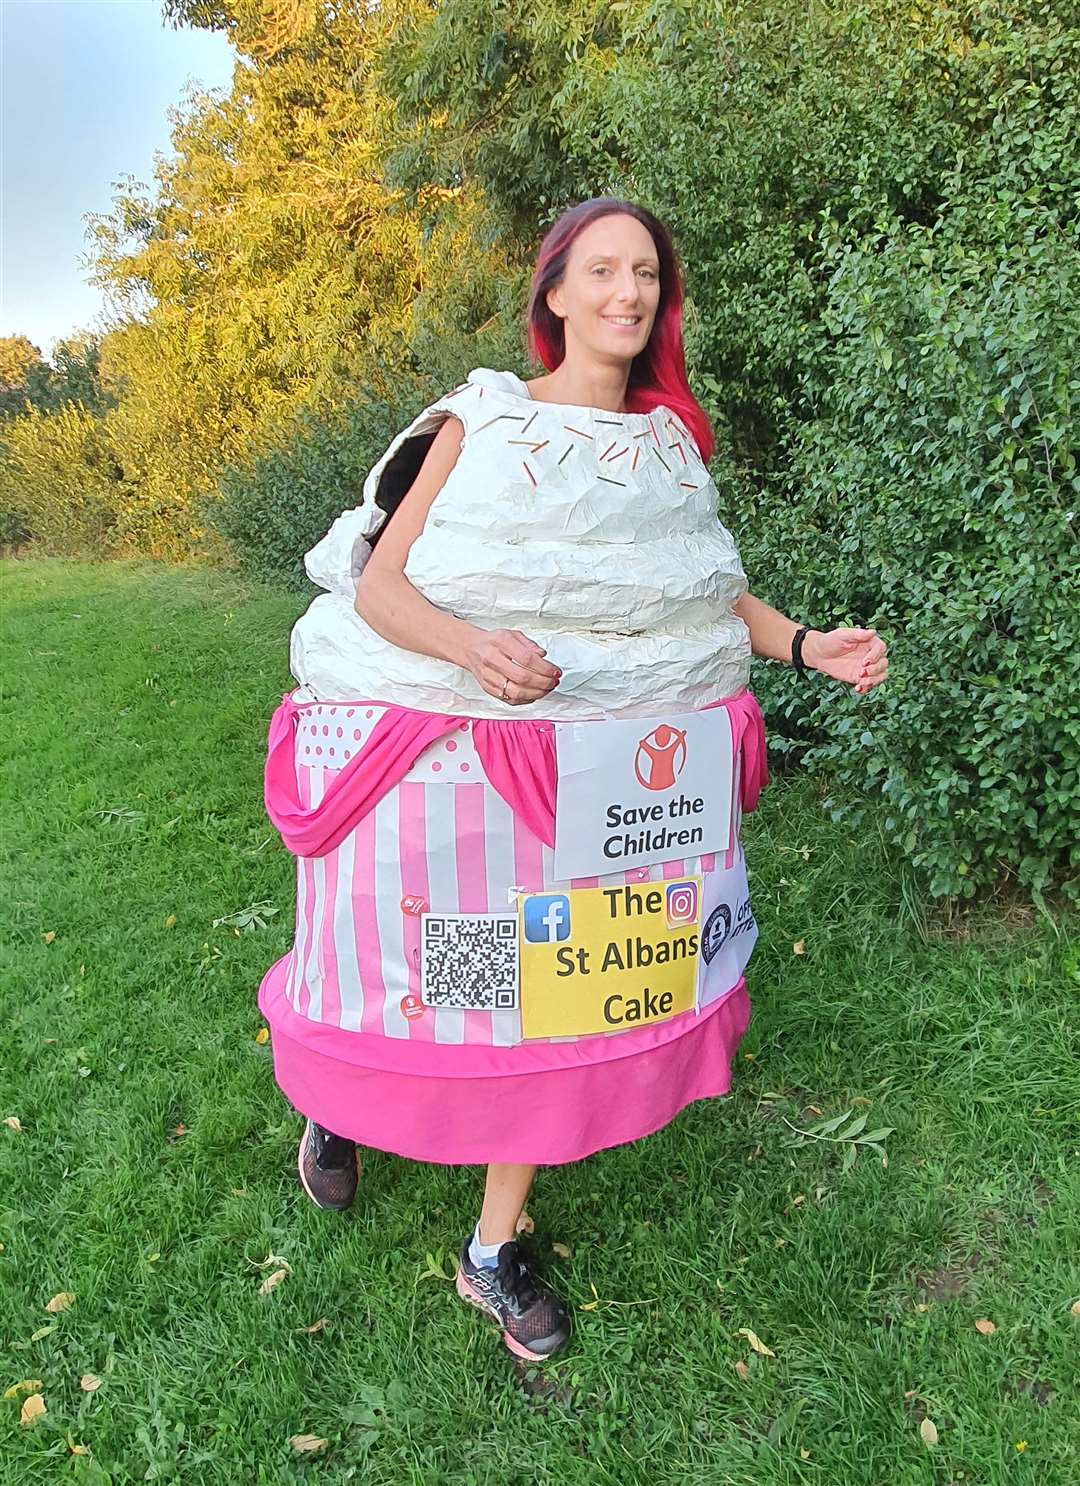 Anna Bassil is hoping to beat the Guinness World Record as fastest woman dressed as a sweet food at the London Marathon (Anna Bassil/PA)